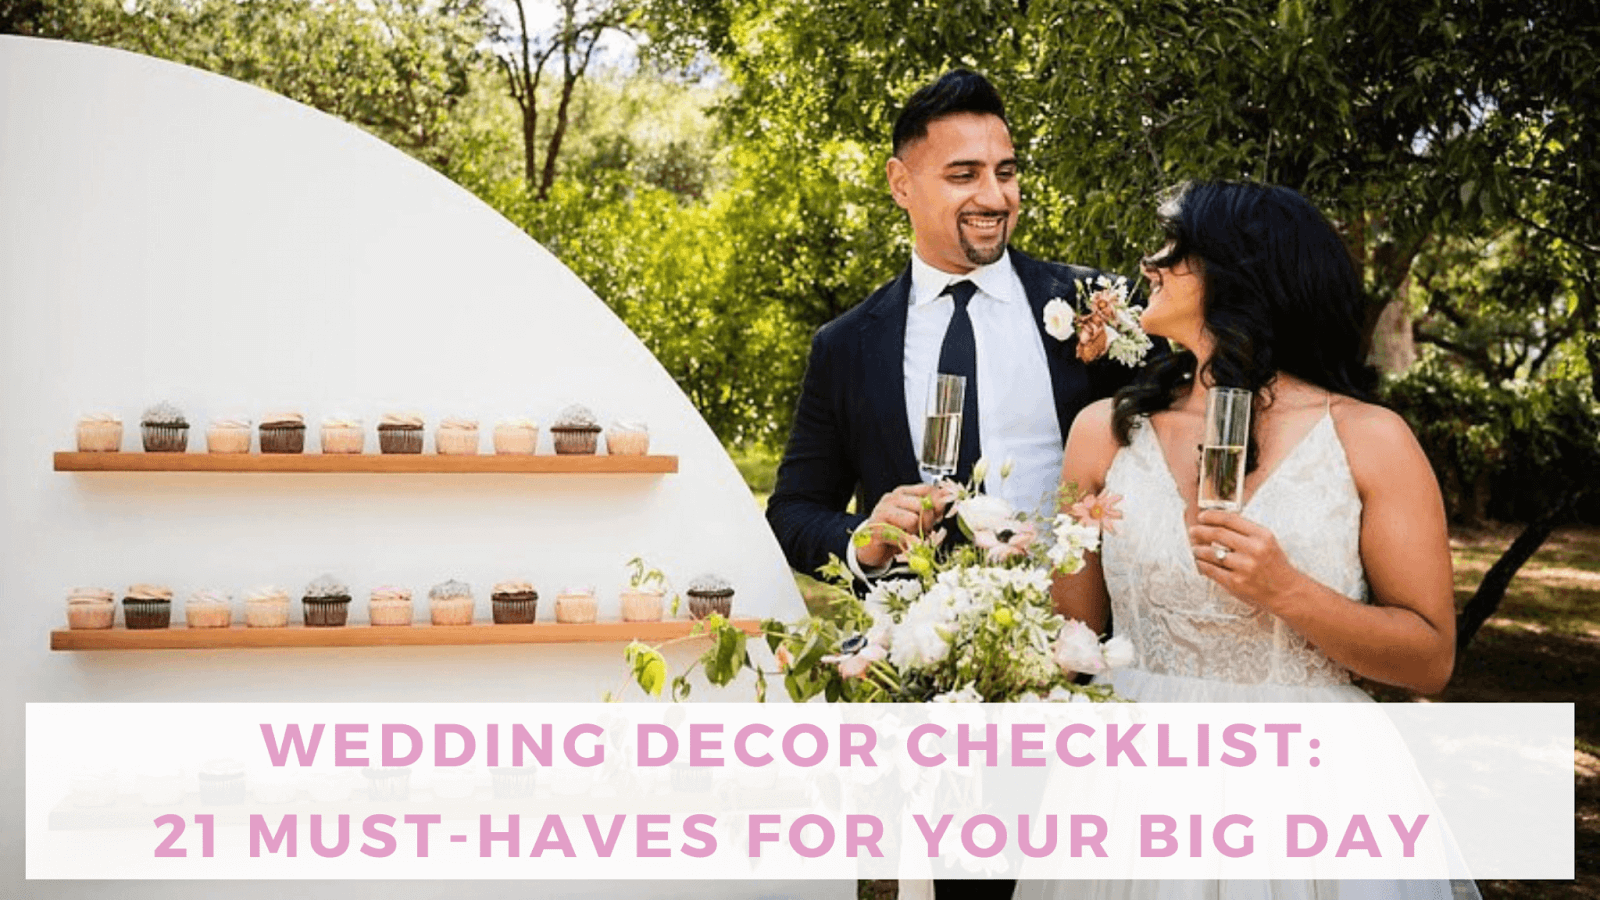 Wedding Decor Checklist: 21 Must-Haves for Your Big Day